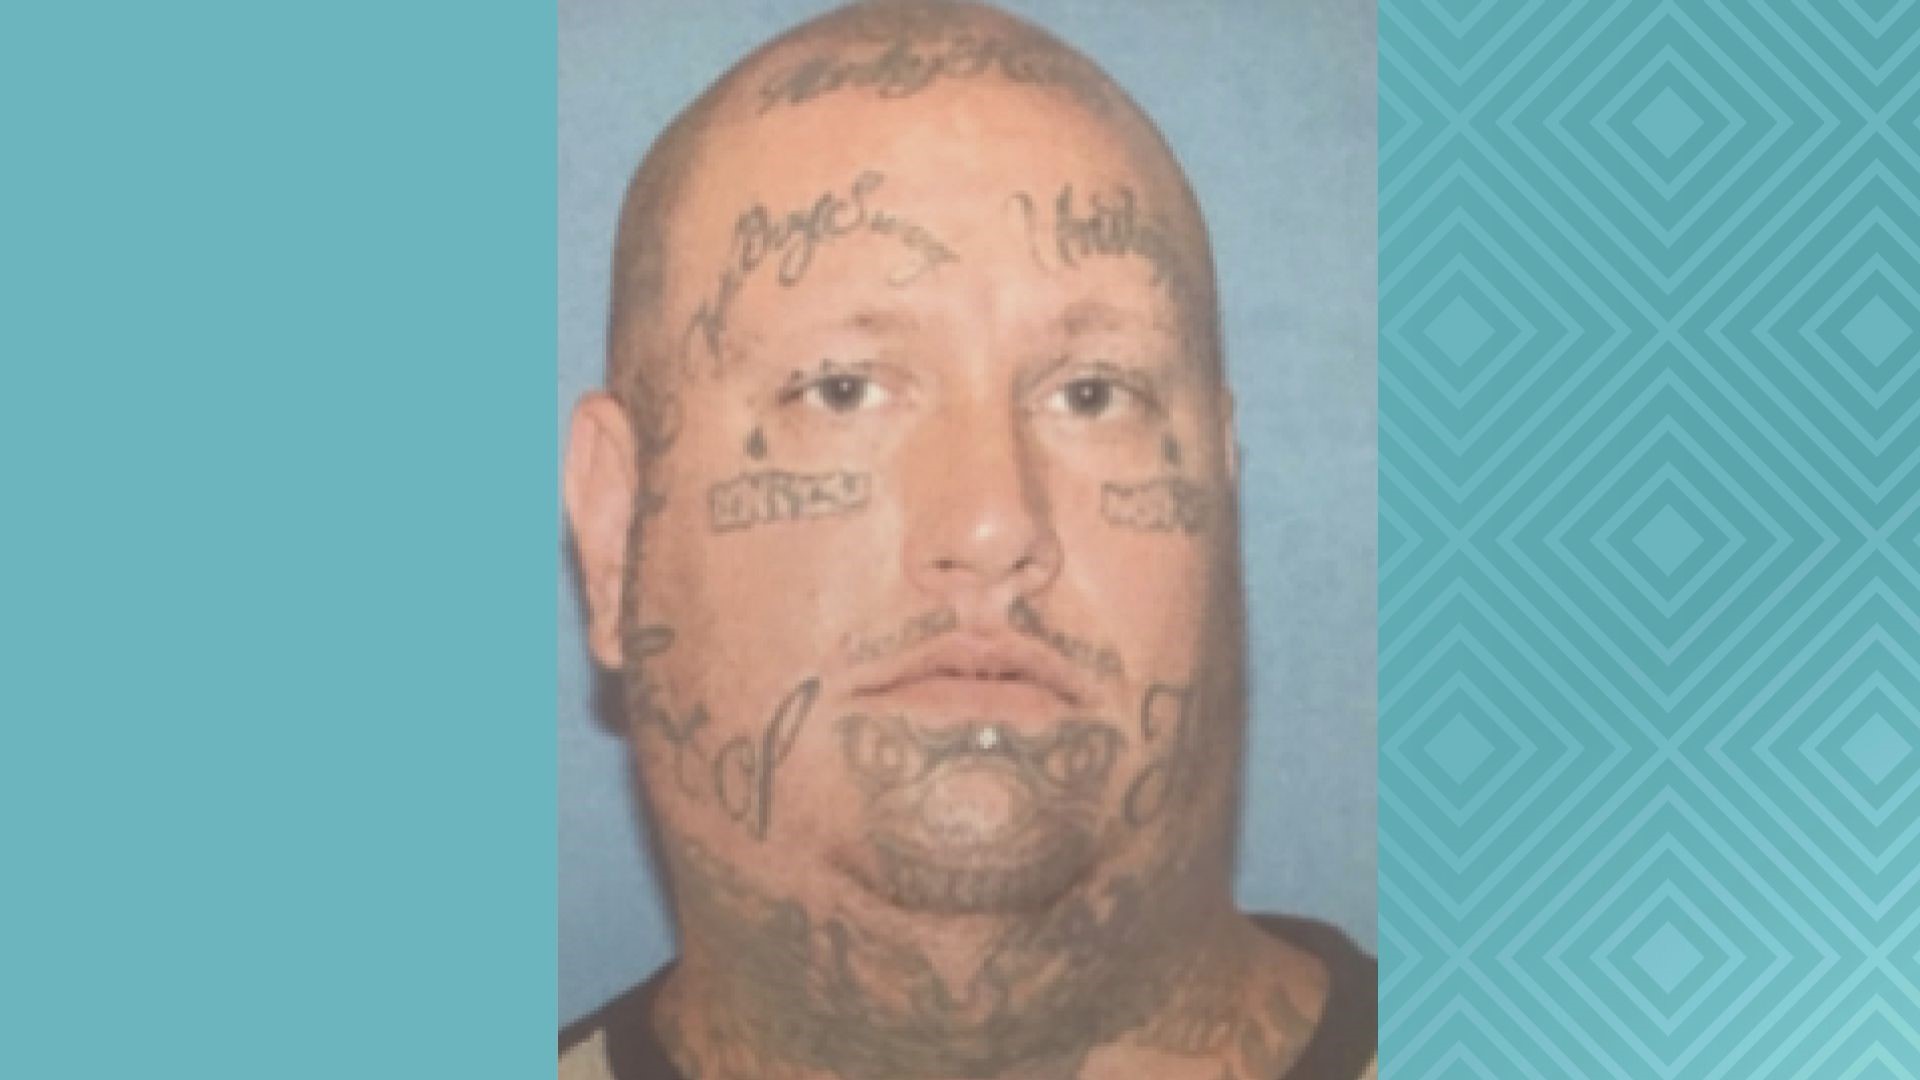 Cleveland fugitive wanted by U.S. Marshals for deadly shooting